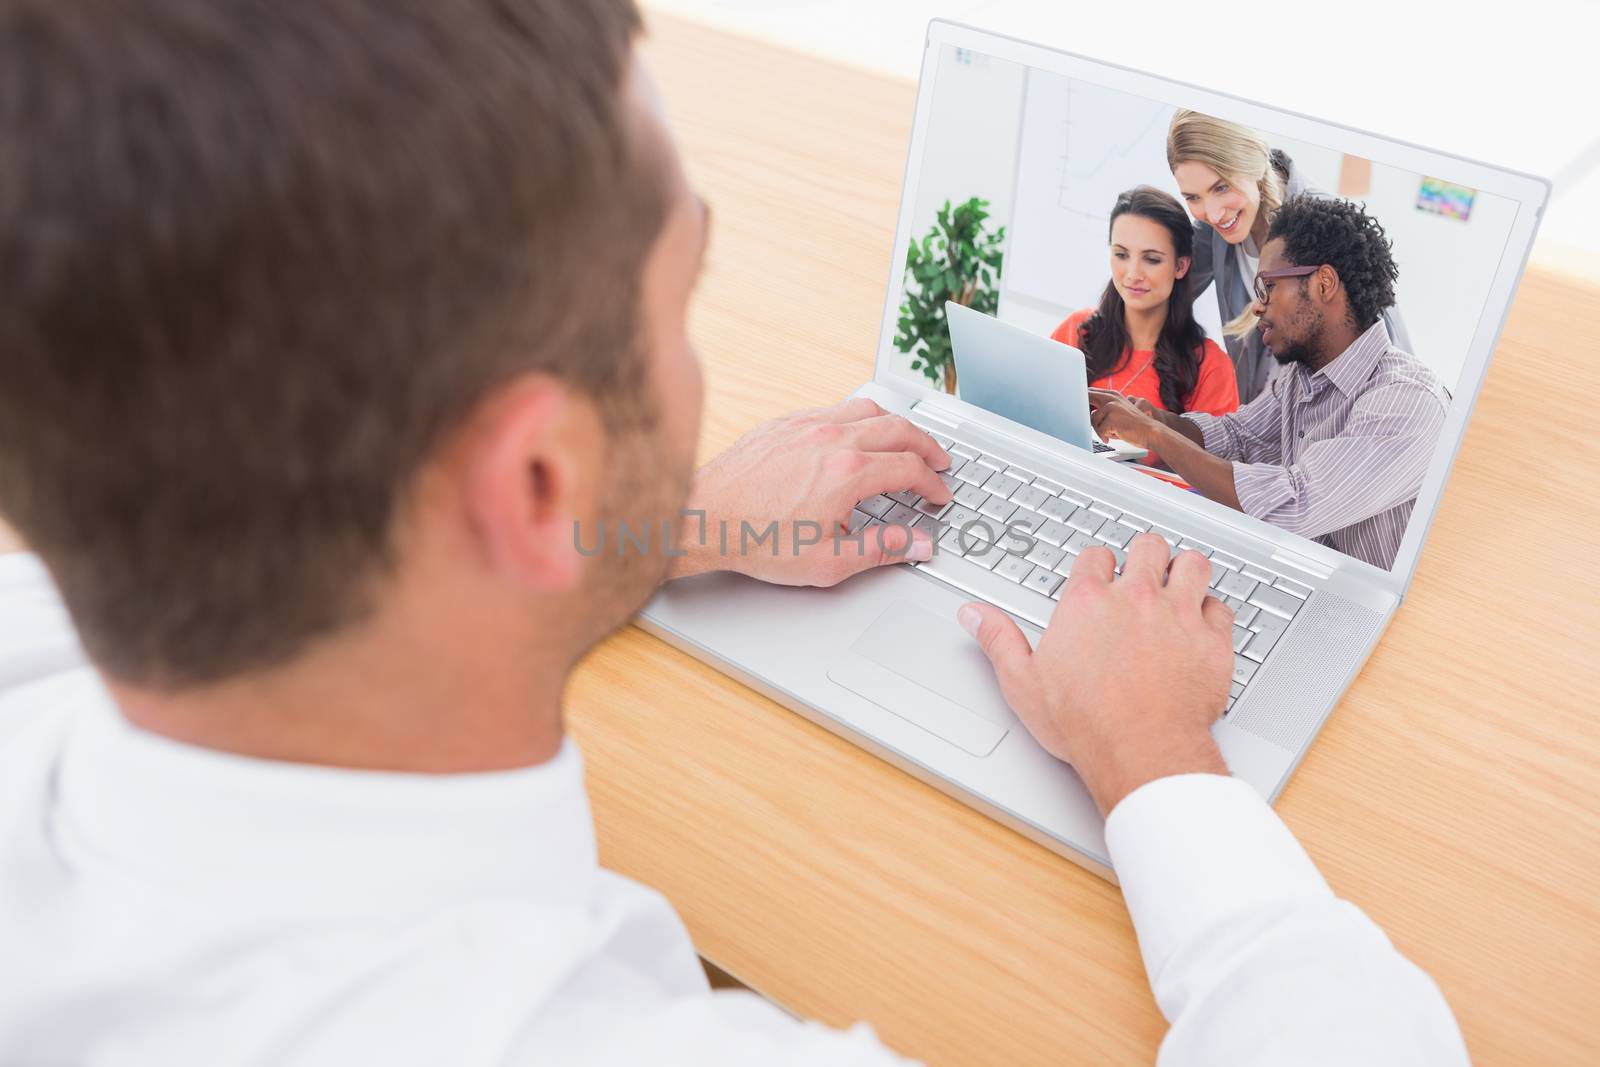 Three designers working together on a laptop against businessman working at his desk 